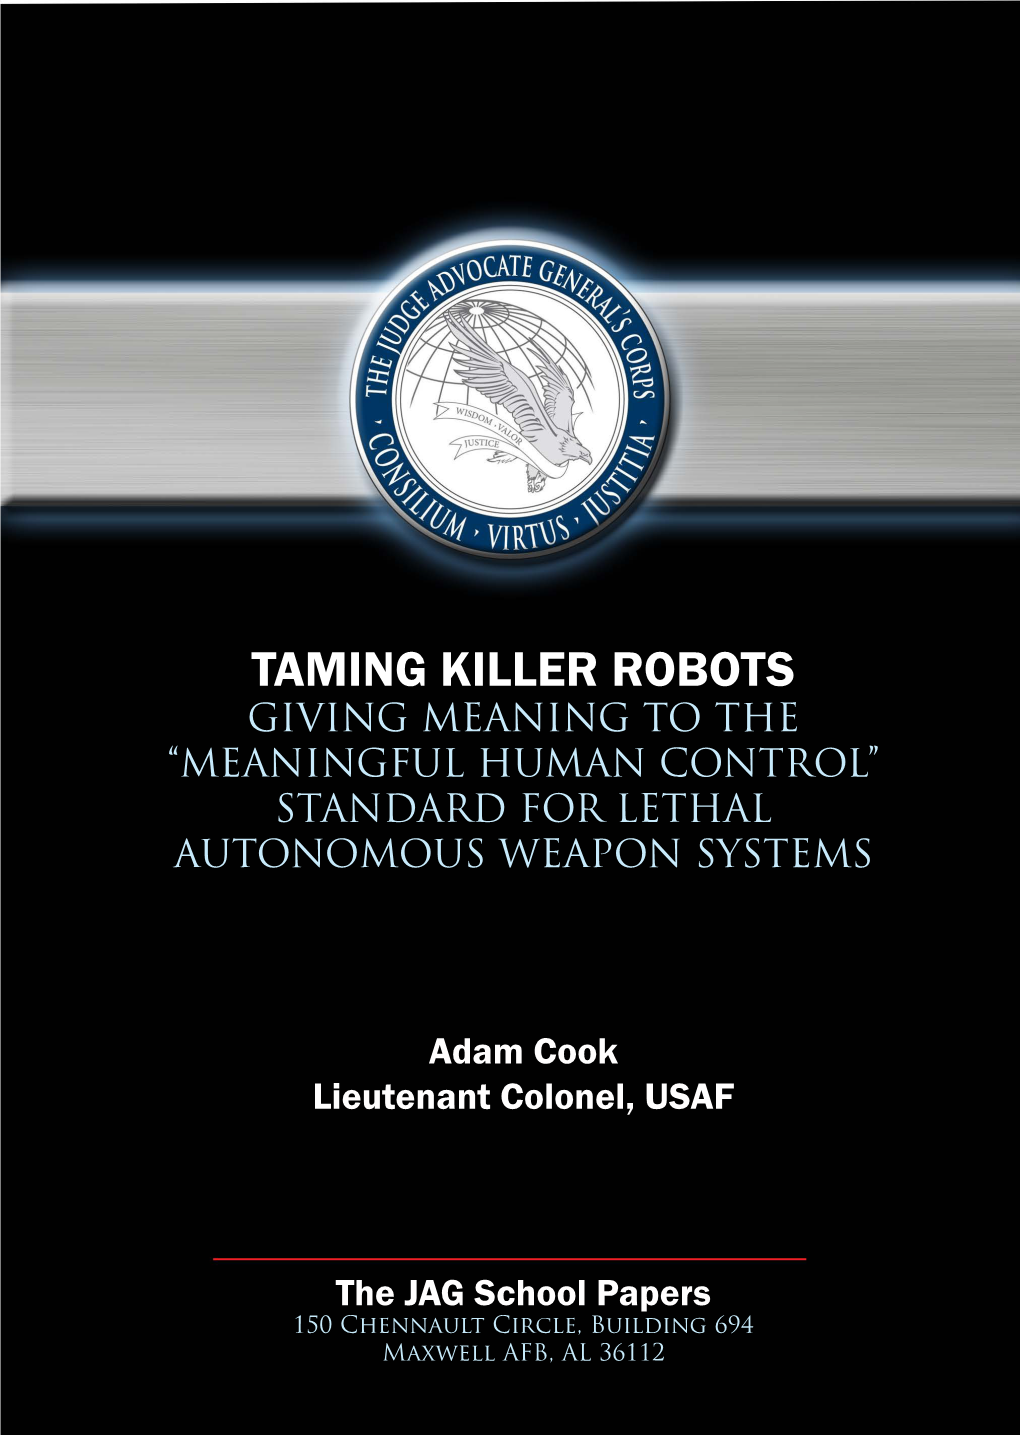 Taming Killer Robots Giving Meaning to the “Meaningful Human Control” Standard for Lethal Autonomous Weapon Systems